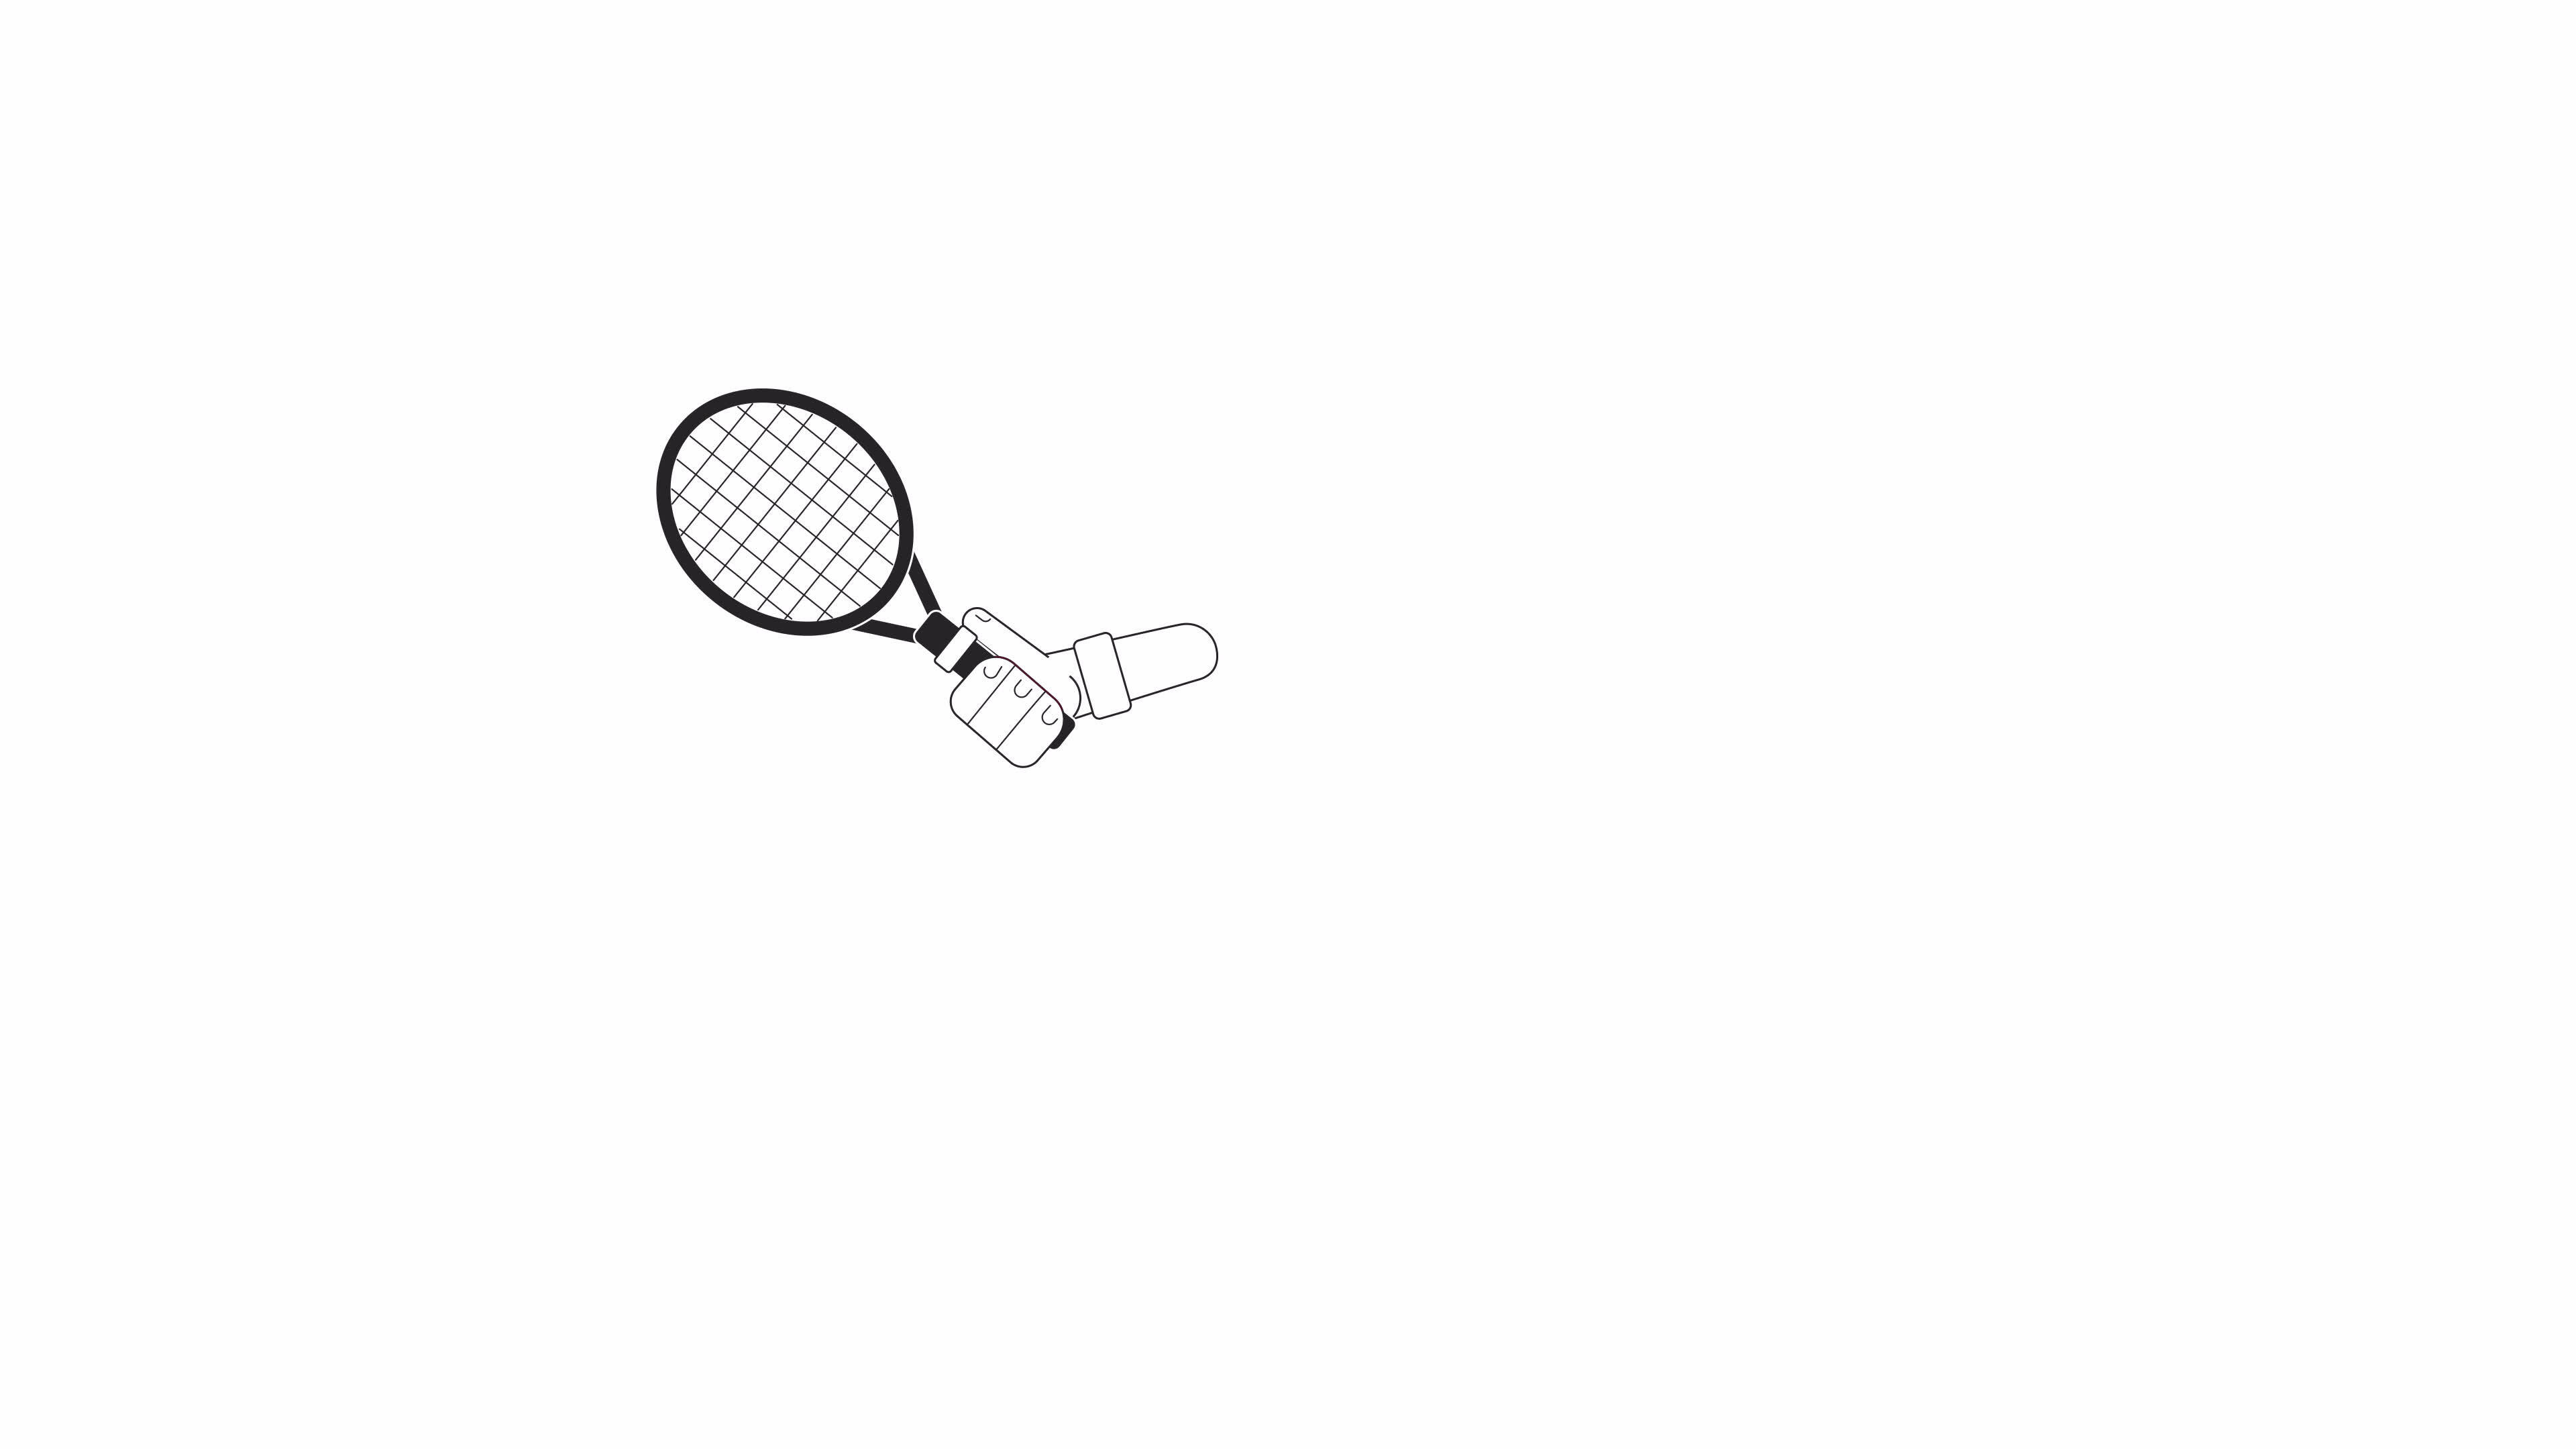 Serve tennis ball bw animation. Animated isolated 2D tennis match hit